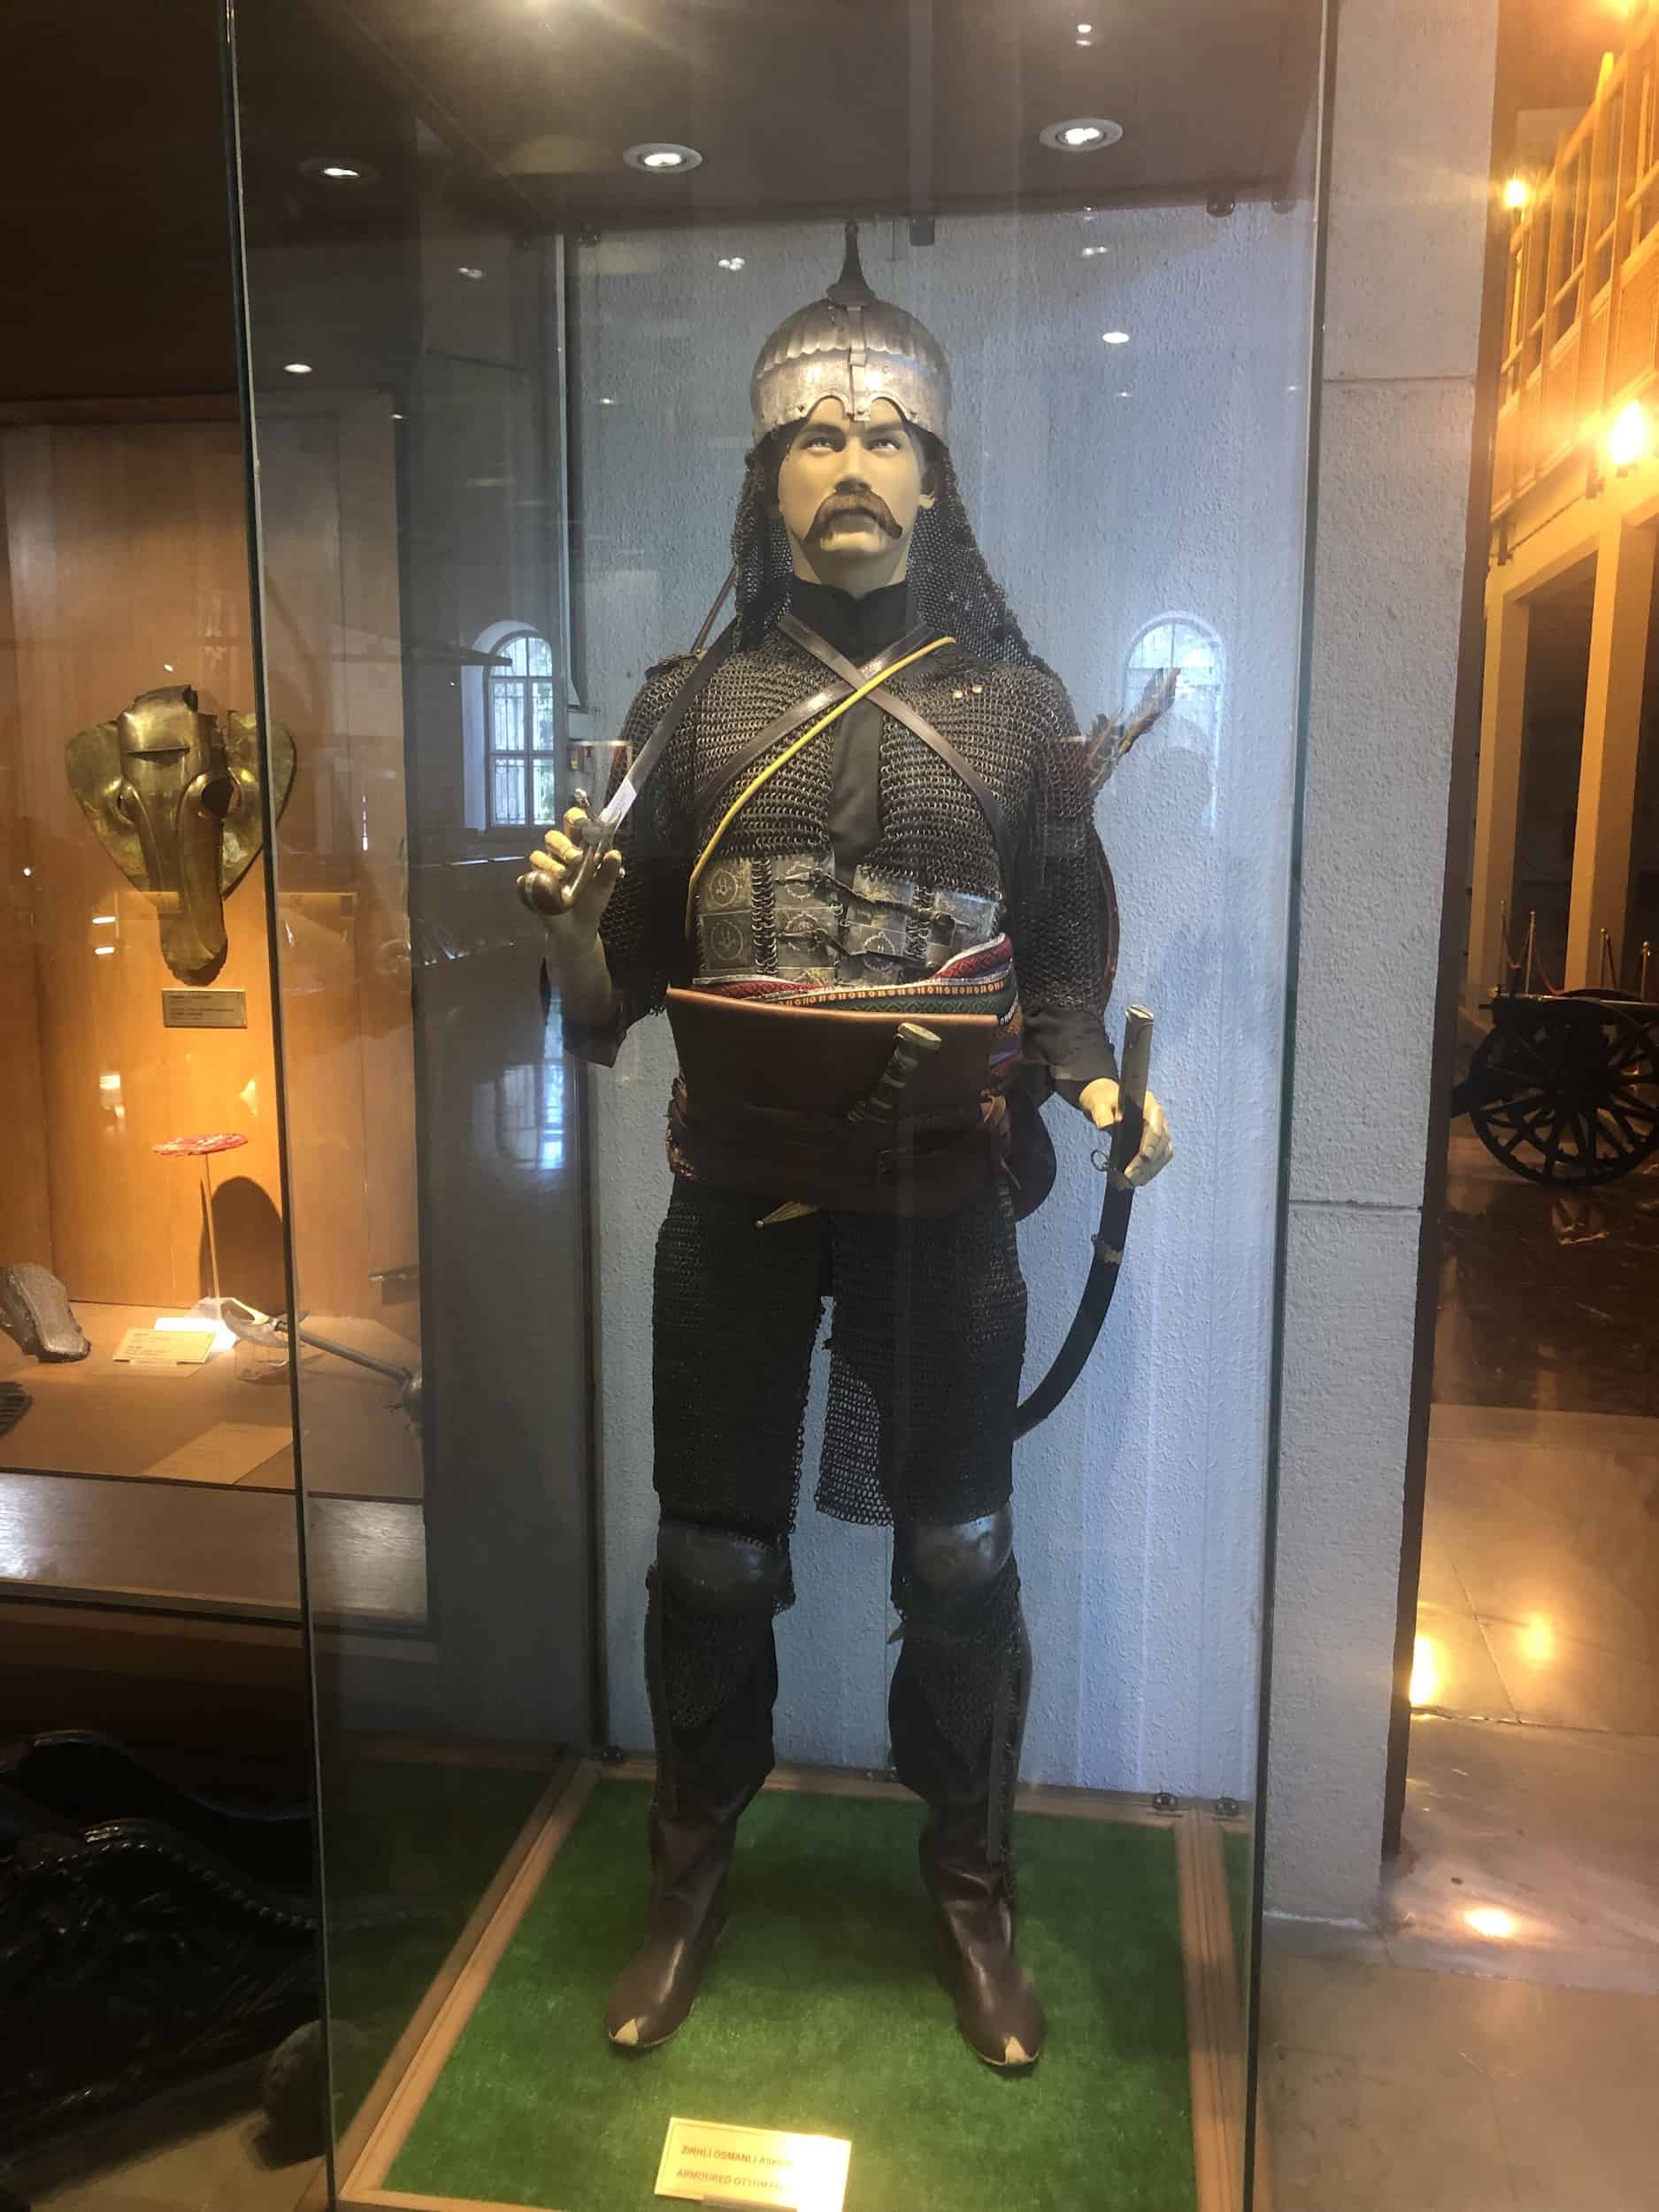 Armored Ottoman soldier at the Harbiye Military Museum in Istanbul, Turkey